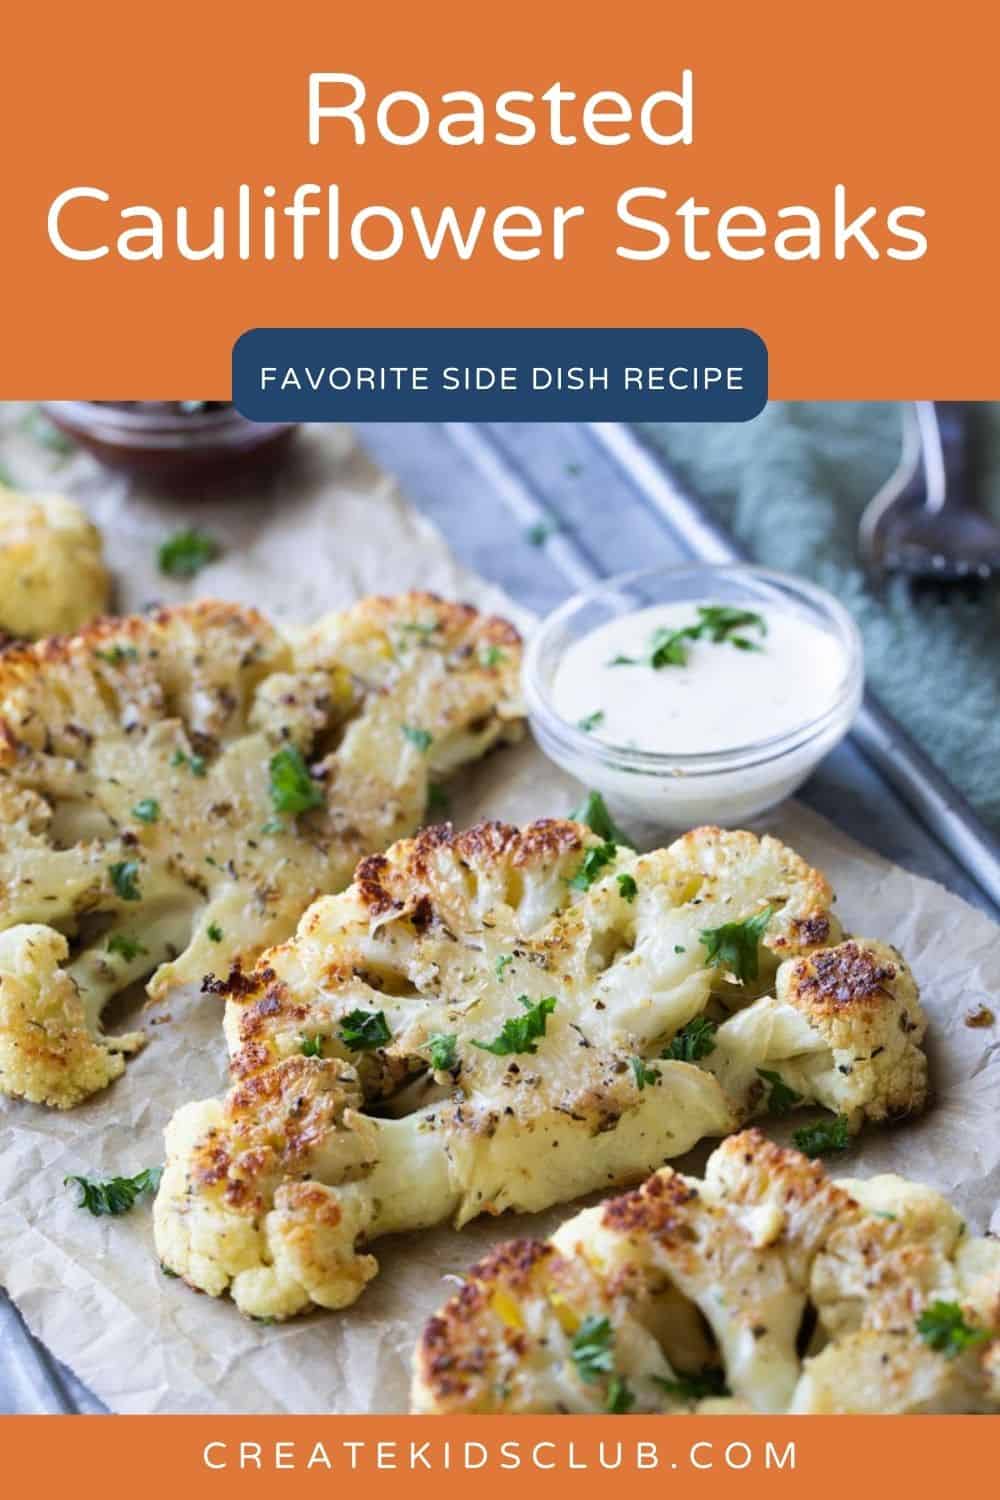 pin of roasted cauliflower steaks on a tray